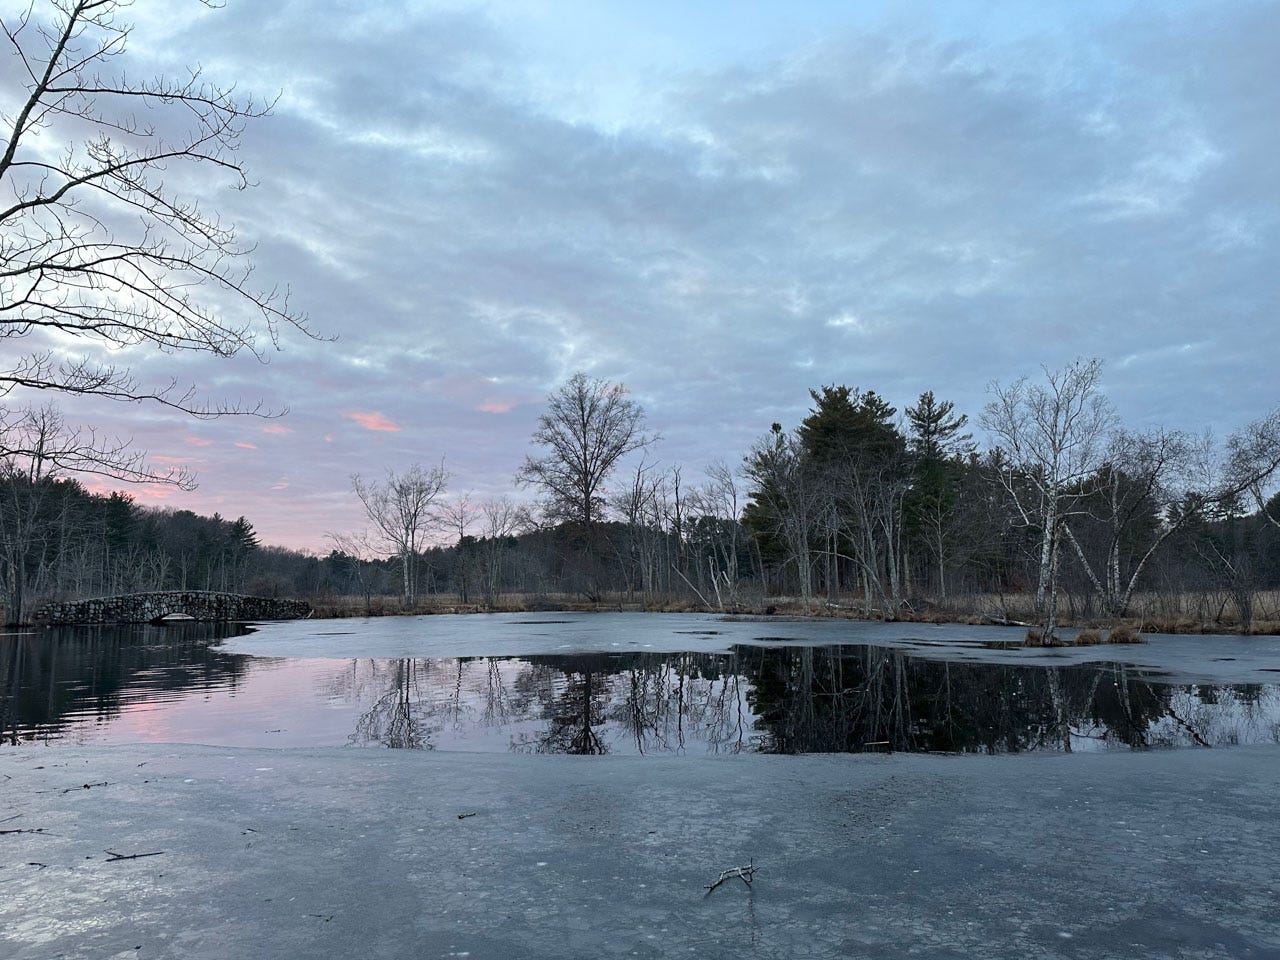 The sun sets behind a partially-frozen pond. The sky is pale blue, fading to pink where the sun hides behind trees; and it is all reflected in an open section in the middle of the pond where the ice has melted to show the water beneath. Where there is still ice, patterns of sparkling lines web over the surface.